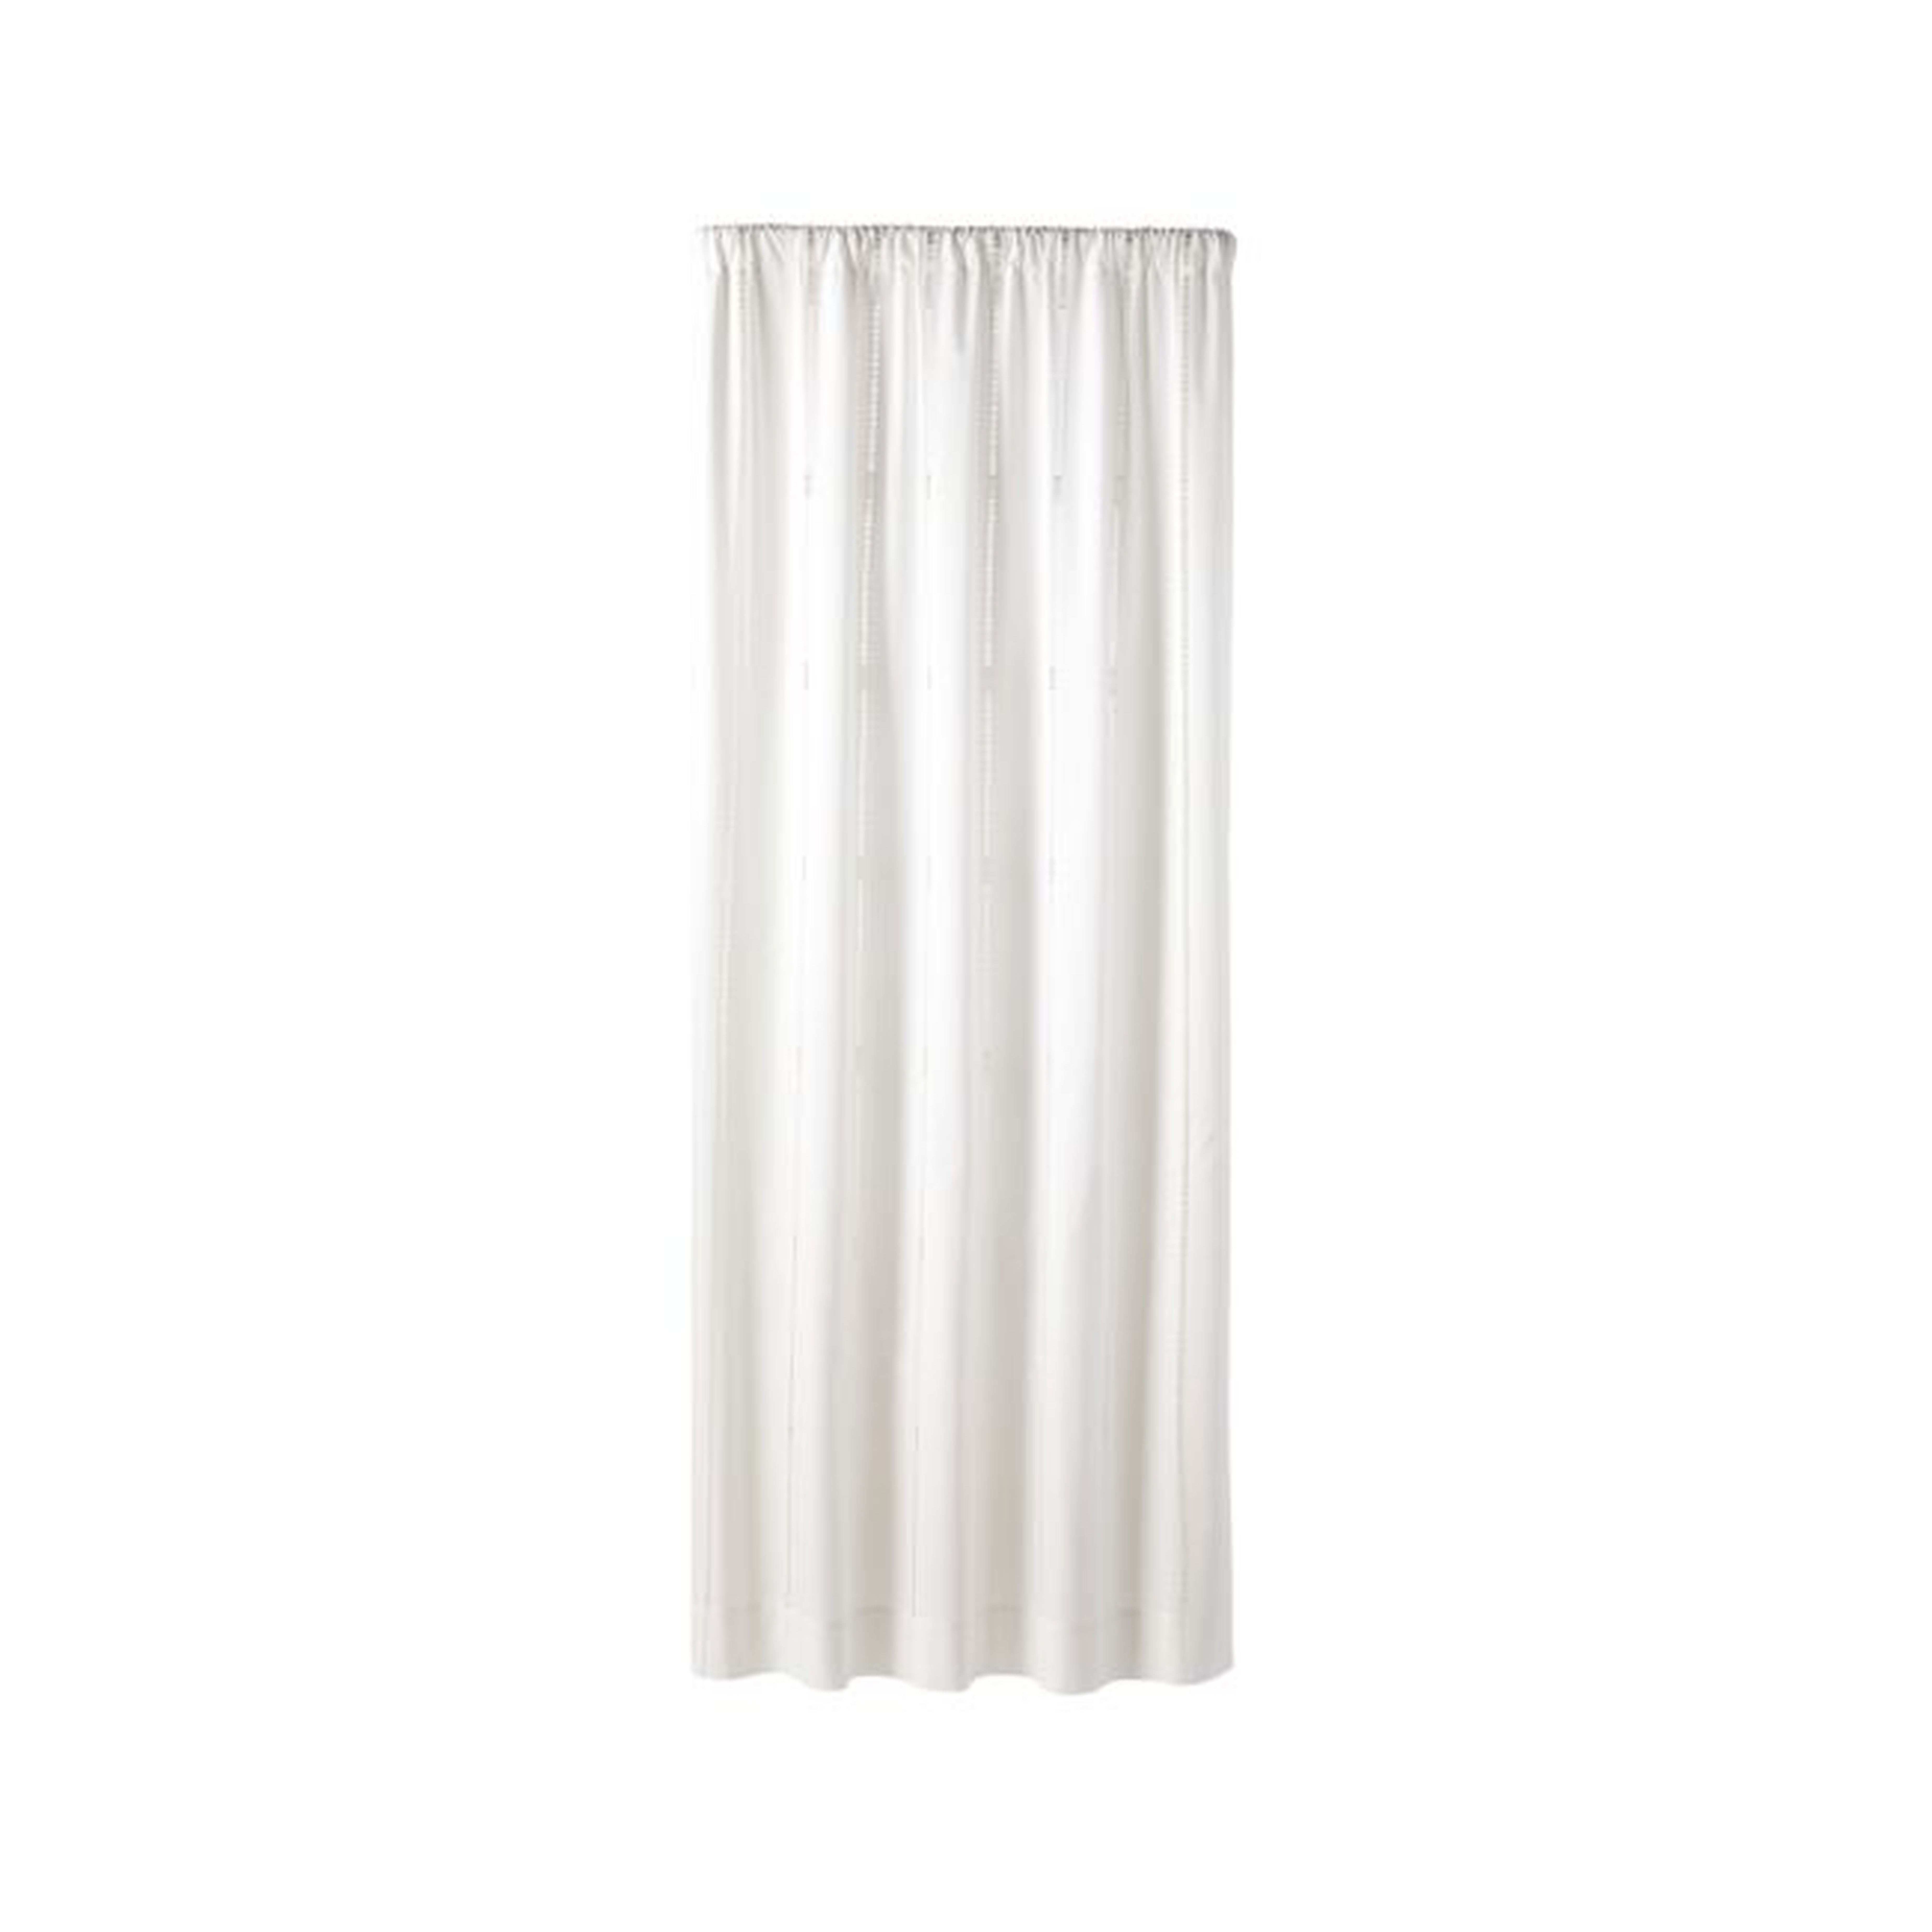 Eyelet White Curtain Panel 50" x 96" - Crate and Barrel